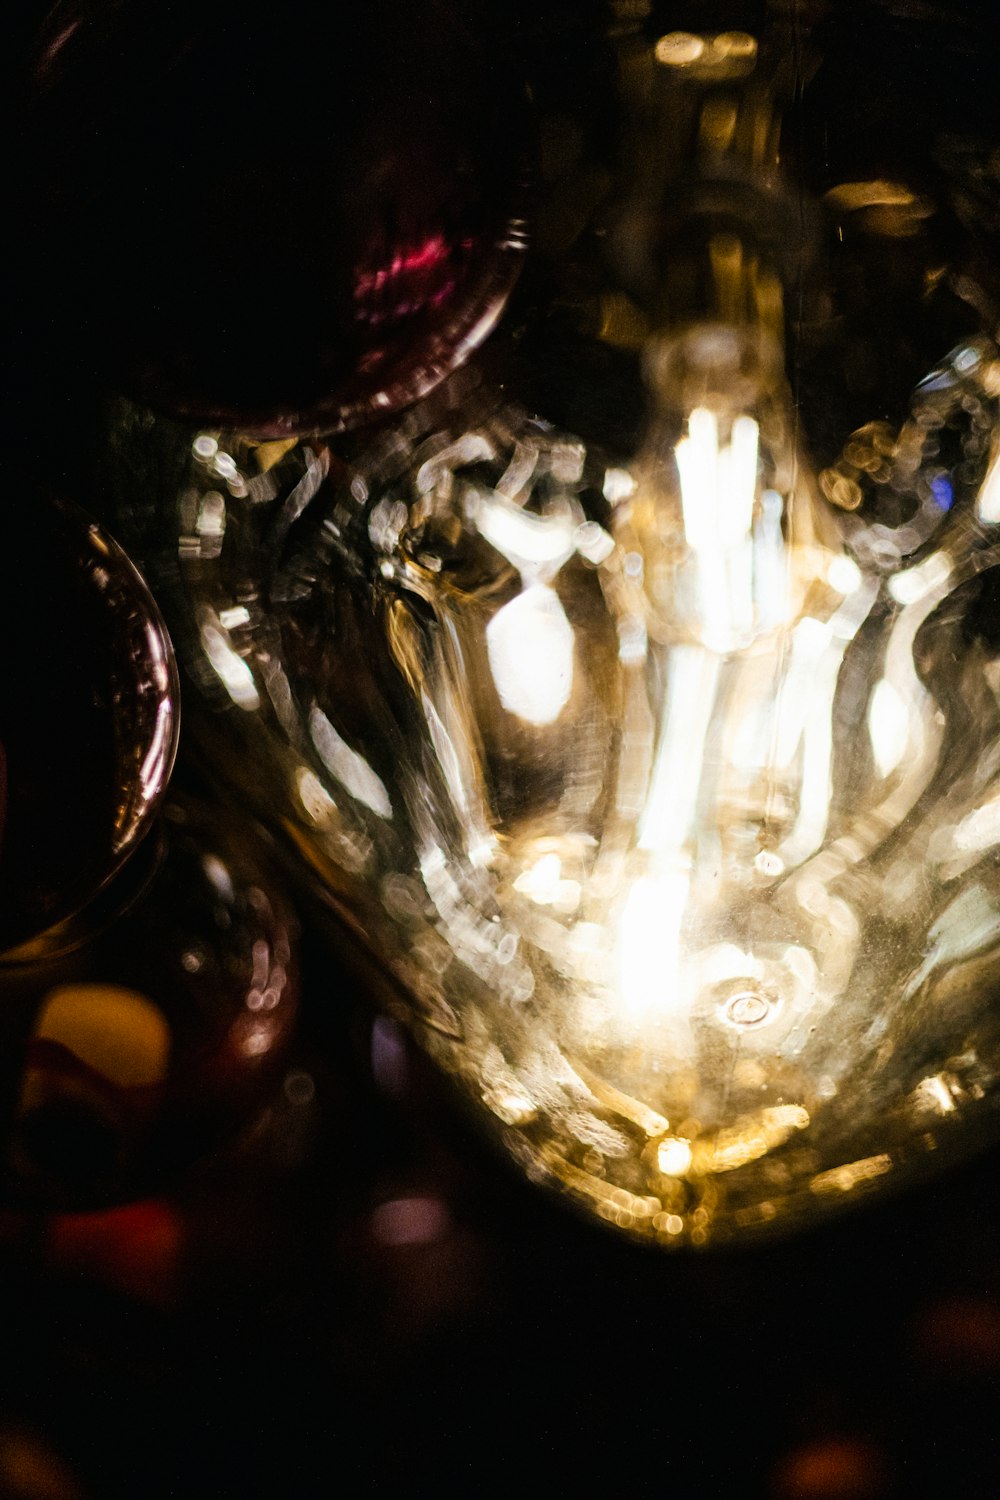 a close up of a light bulb in a glass vase